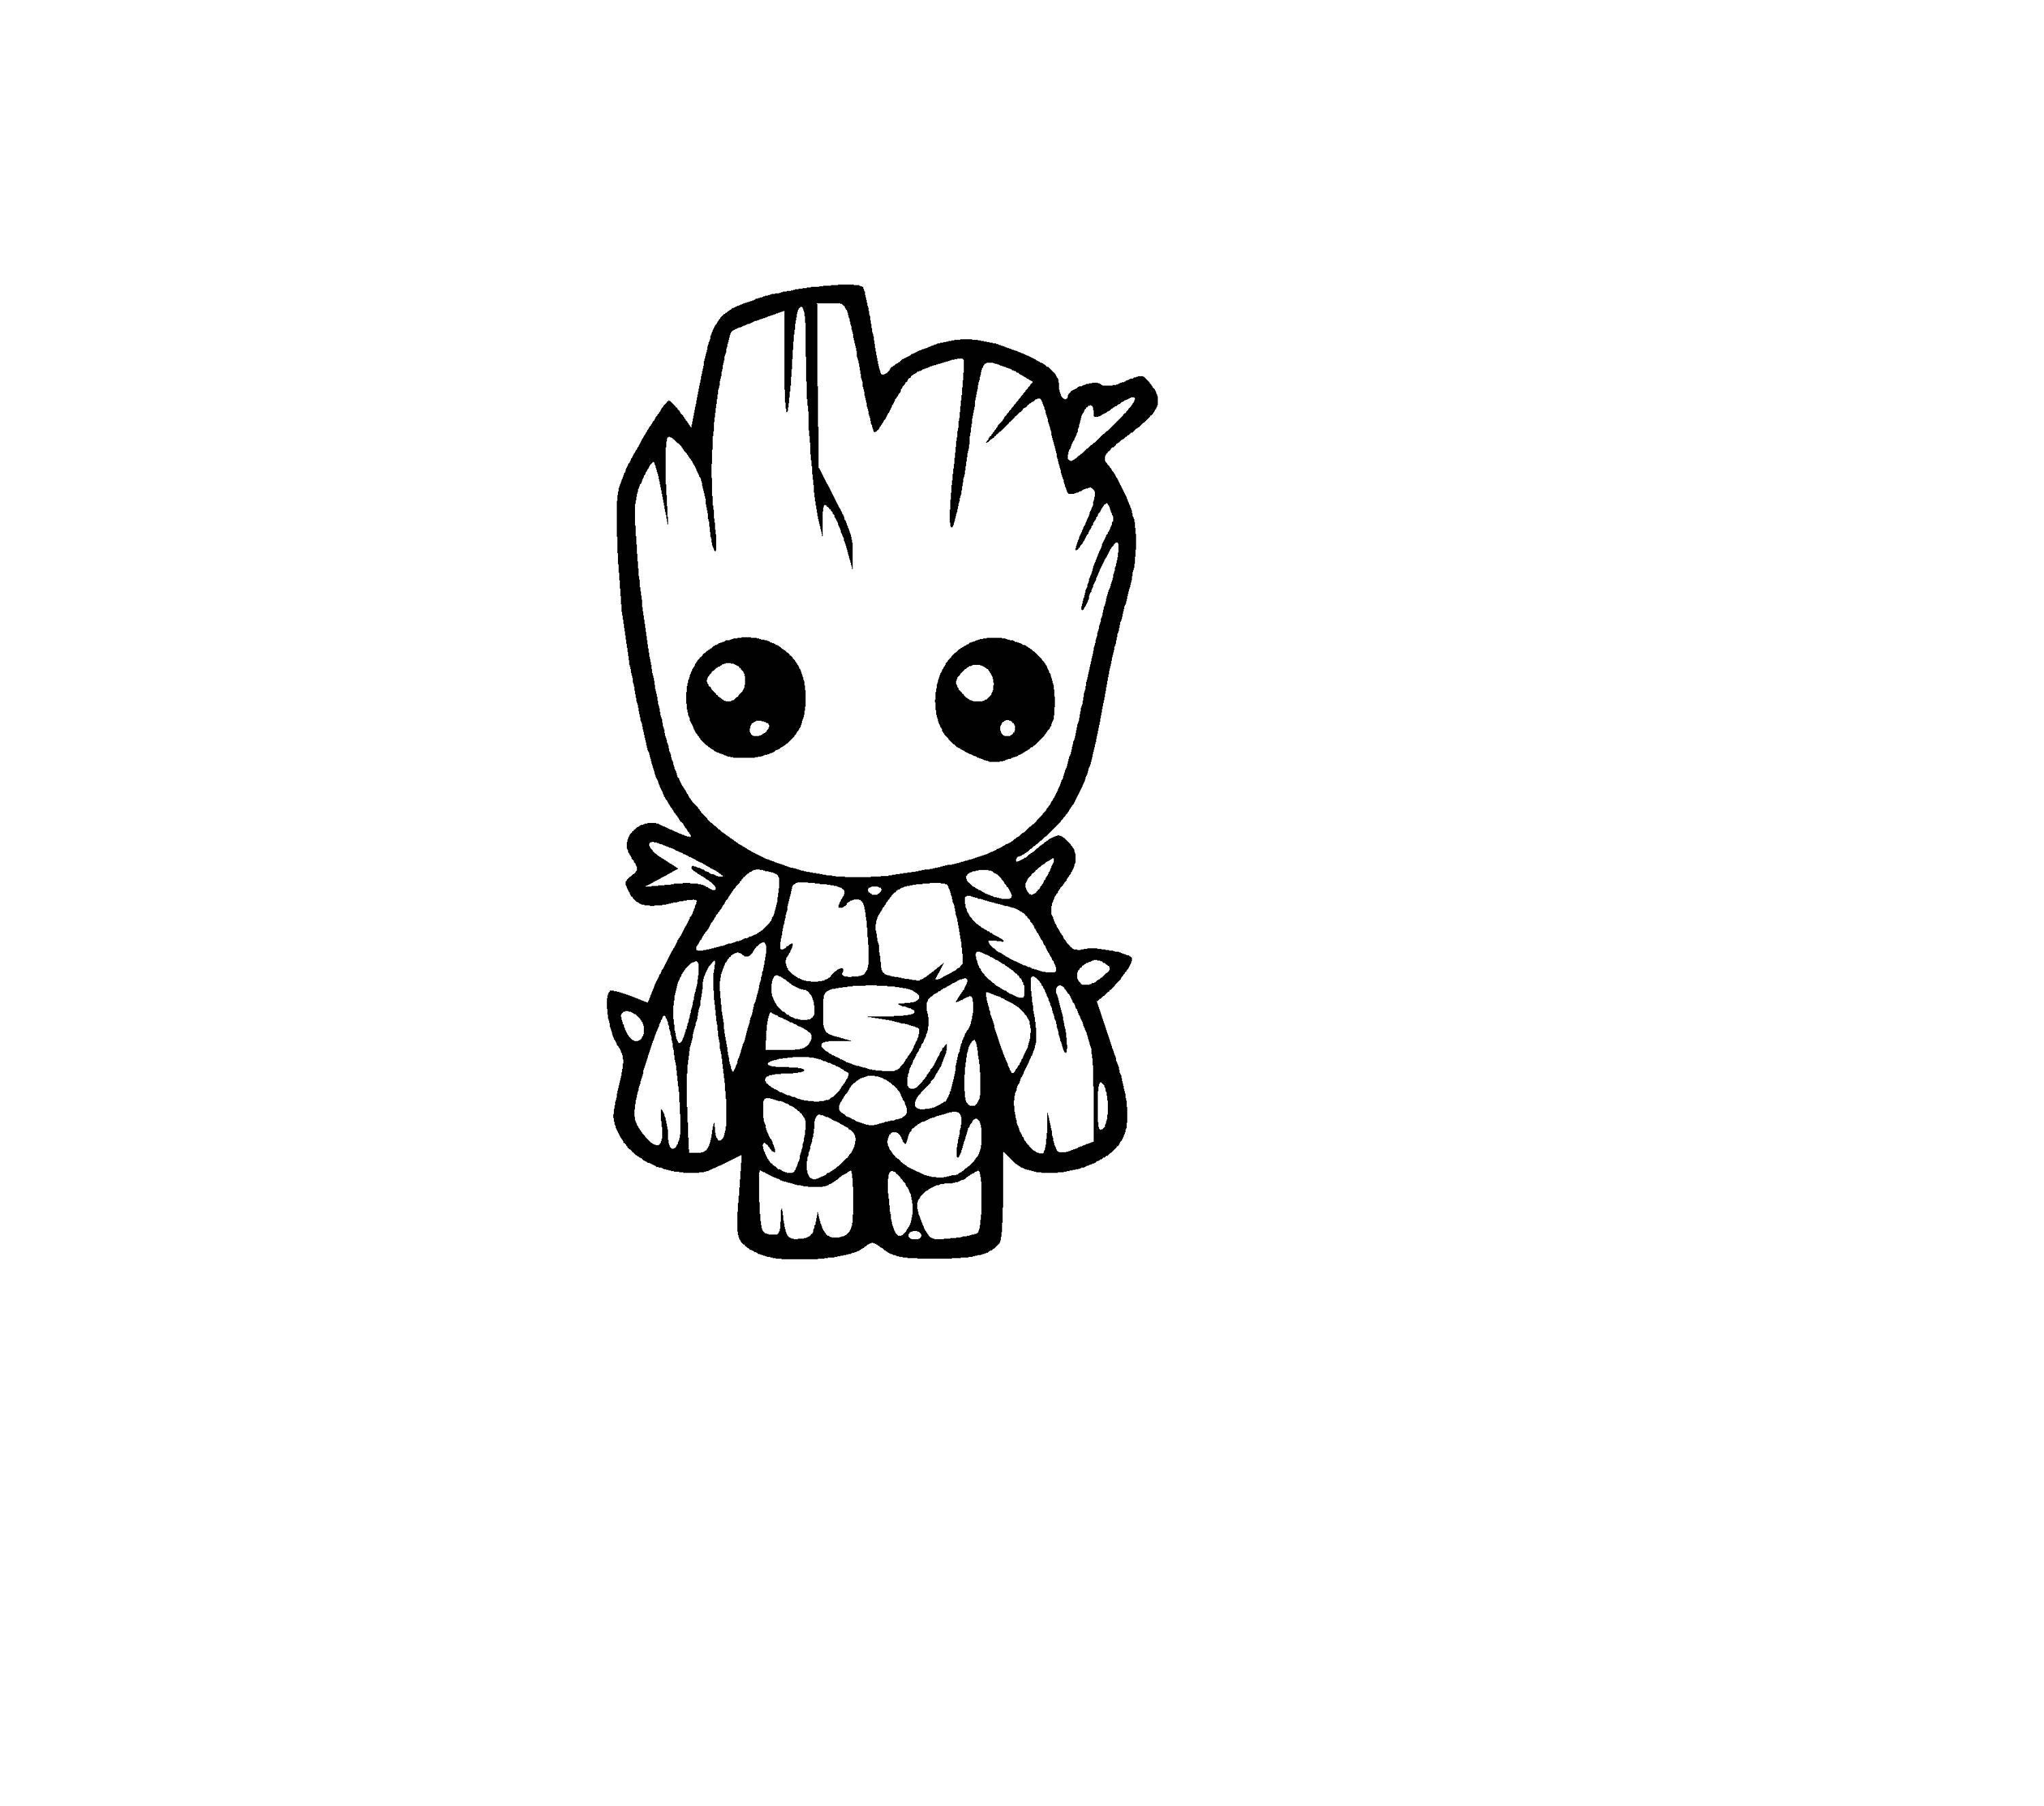 BABY GROOT sticker decal decorative